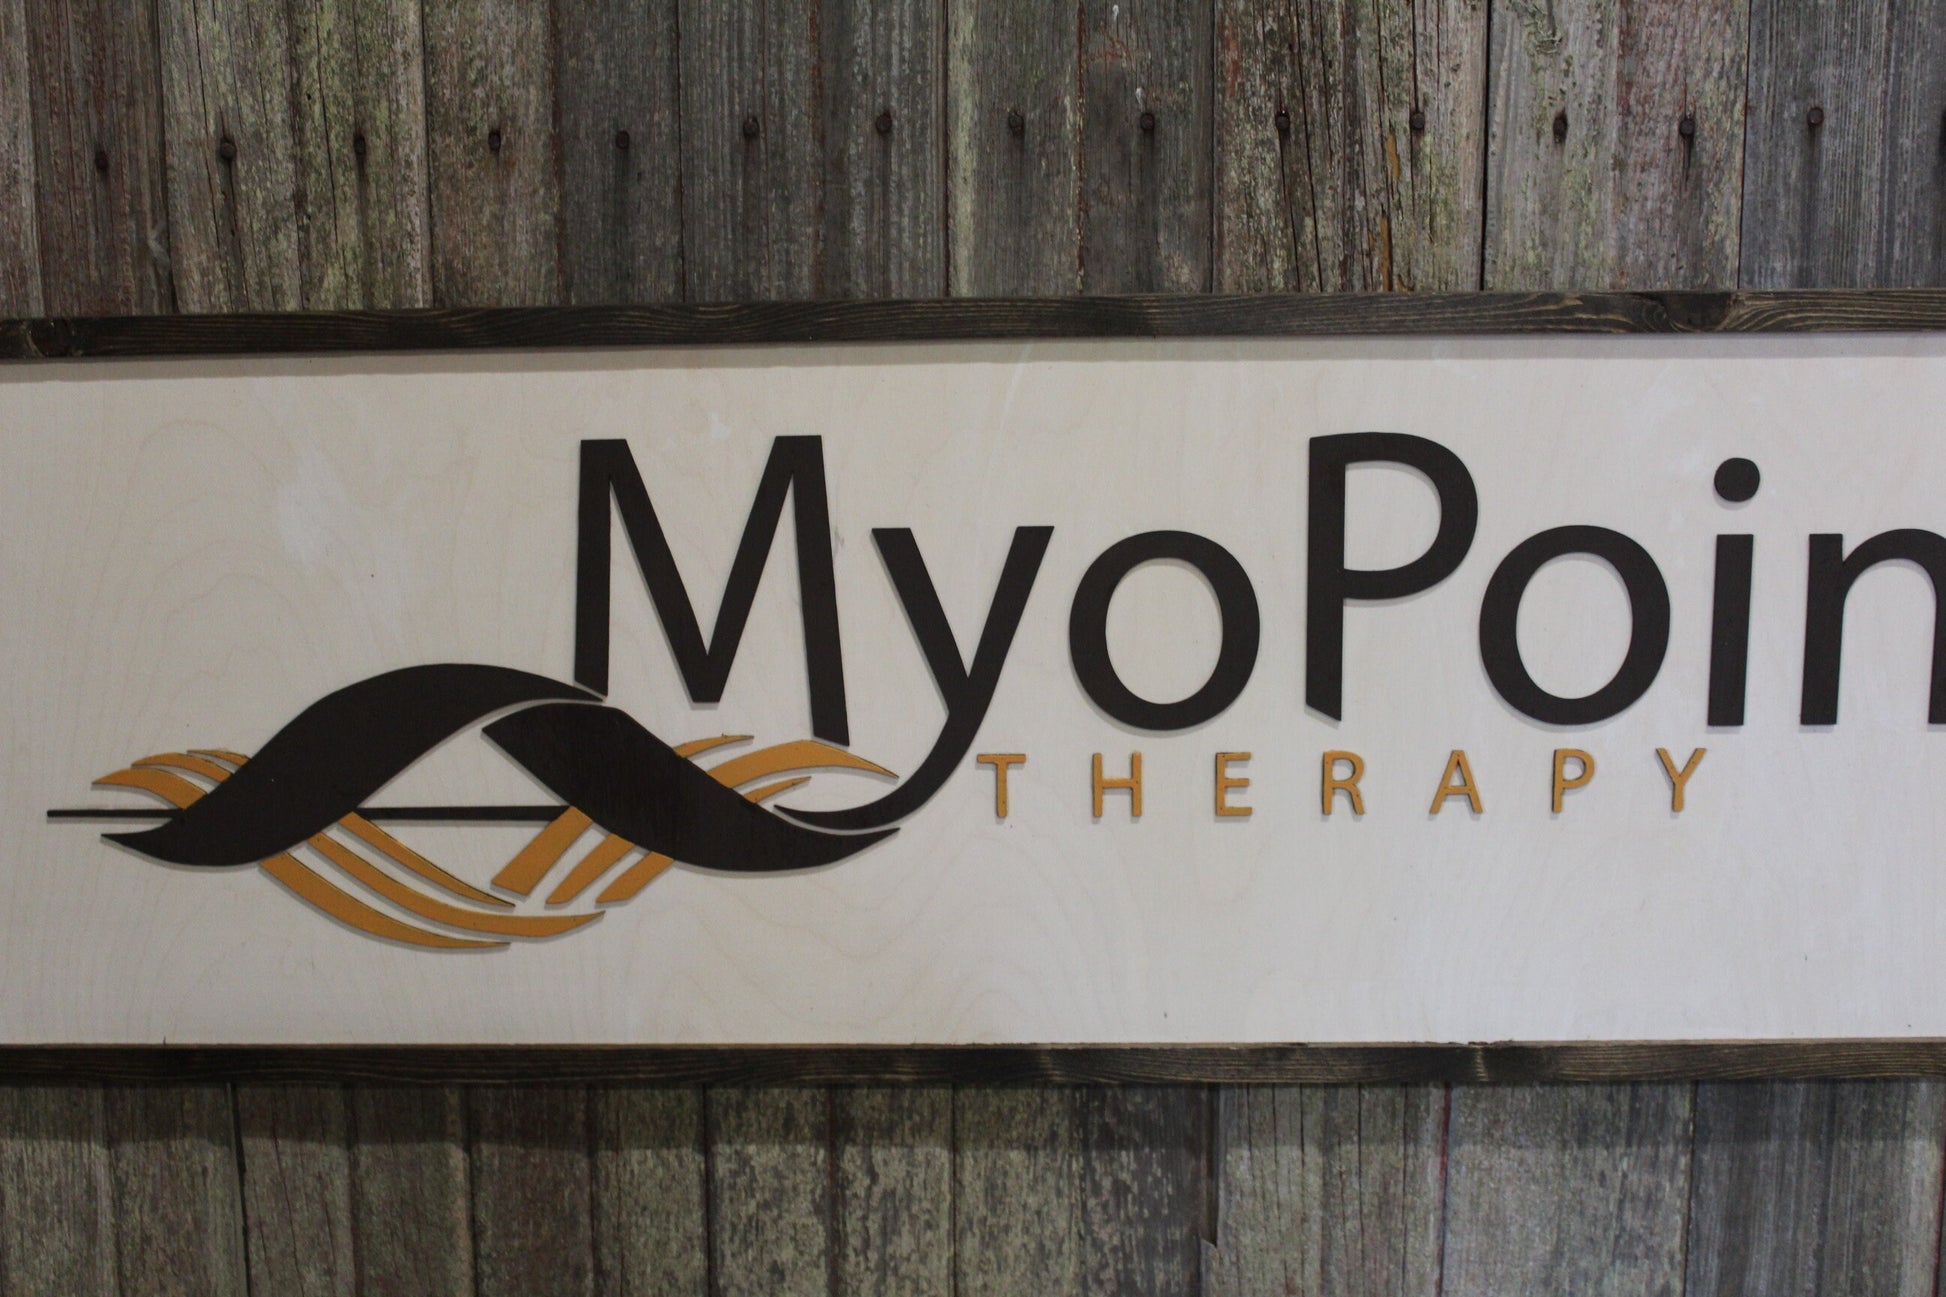 Therapy Small Business Custom Wood Sign Large Commercial Signage Outdoor Sign Use My Logo Graphic Office Entrance Cure Healing Medicine